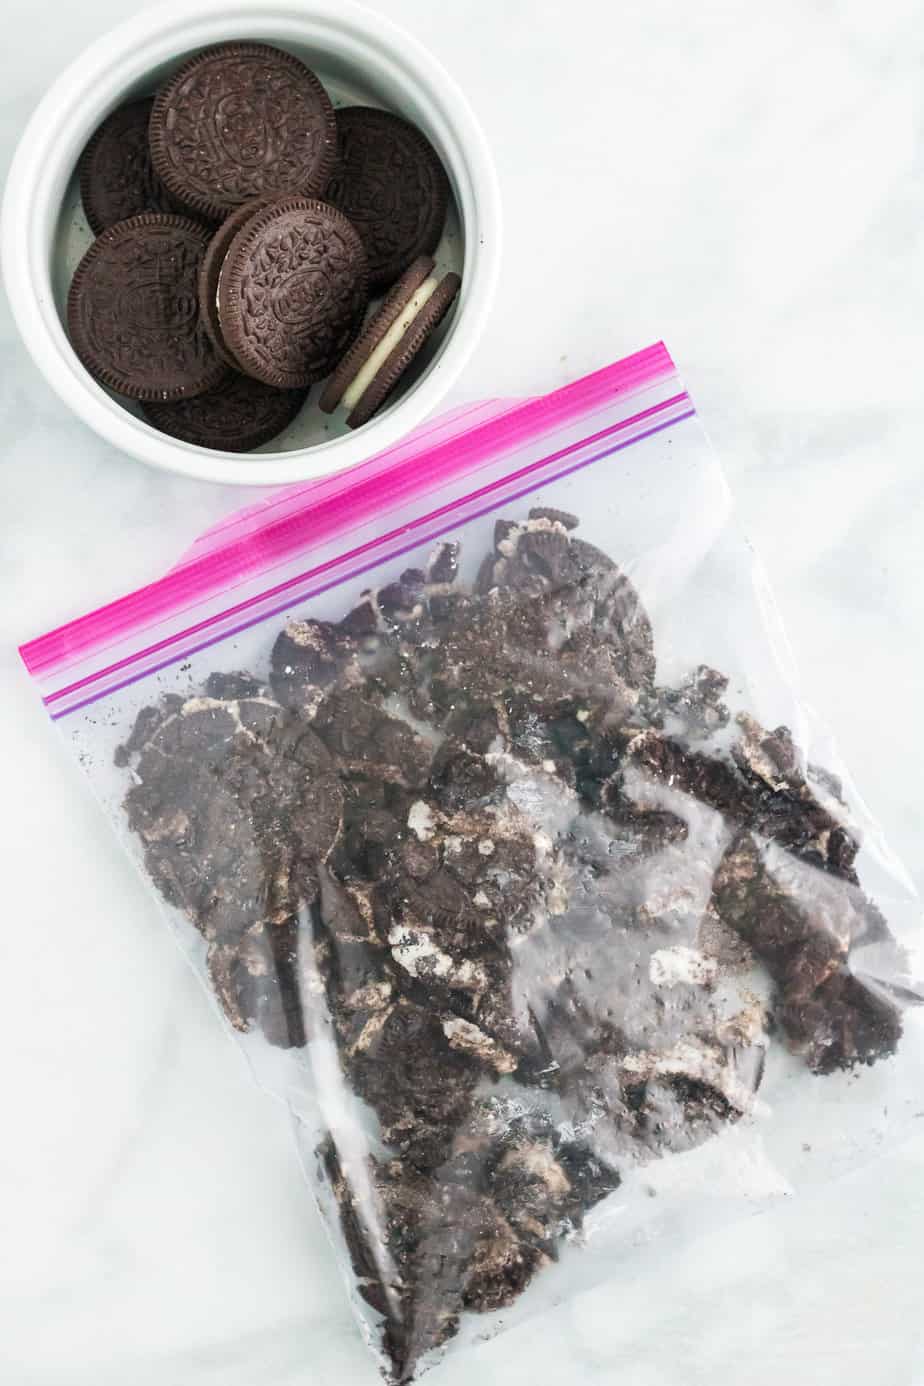 Crushing Oreo Cookies in a zip top bag with more Oreo cookies in a bowl nearby on the counter.